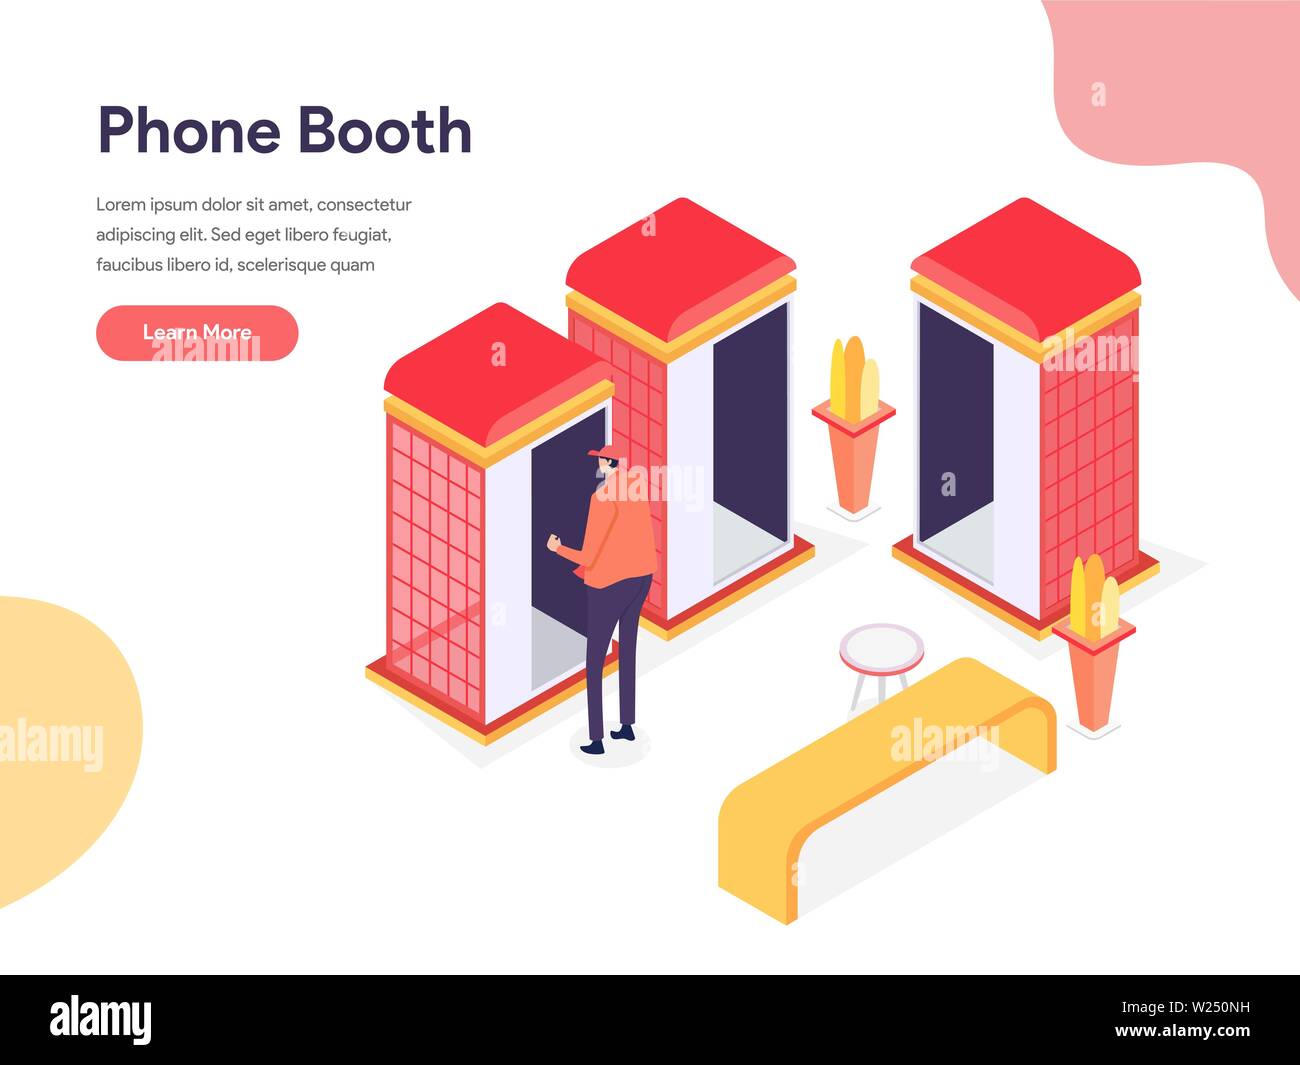 Phone Booth Illustration Concept. Isometric design concept of web page design for website and mobile website.Vector illustration Stock Vector